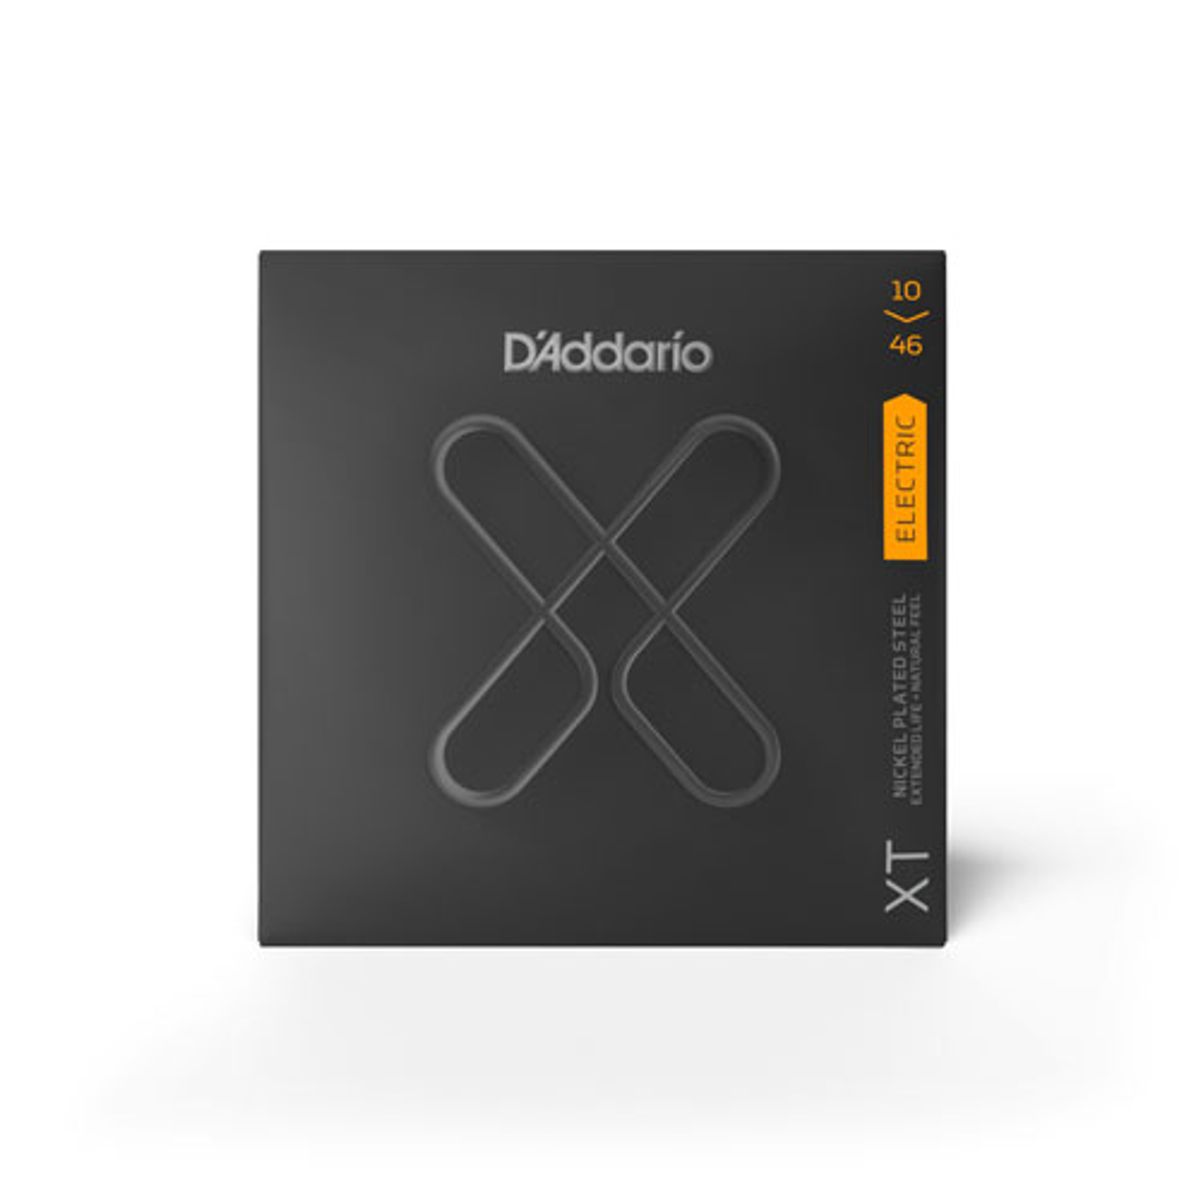 D'Addario Launches XT Line of Strings